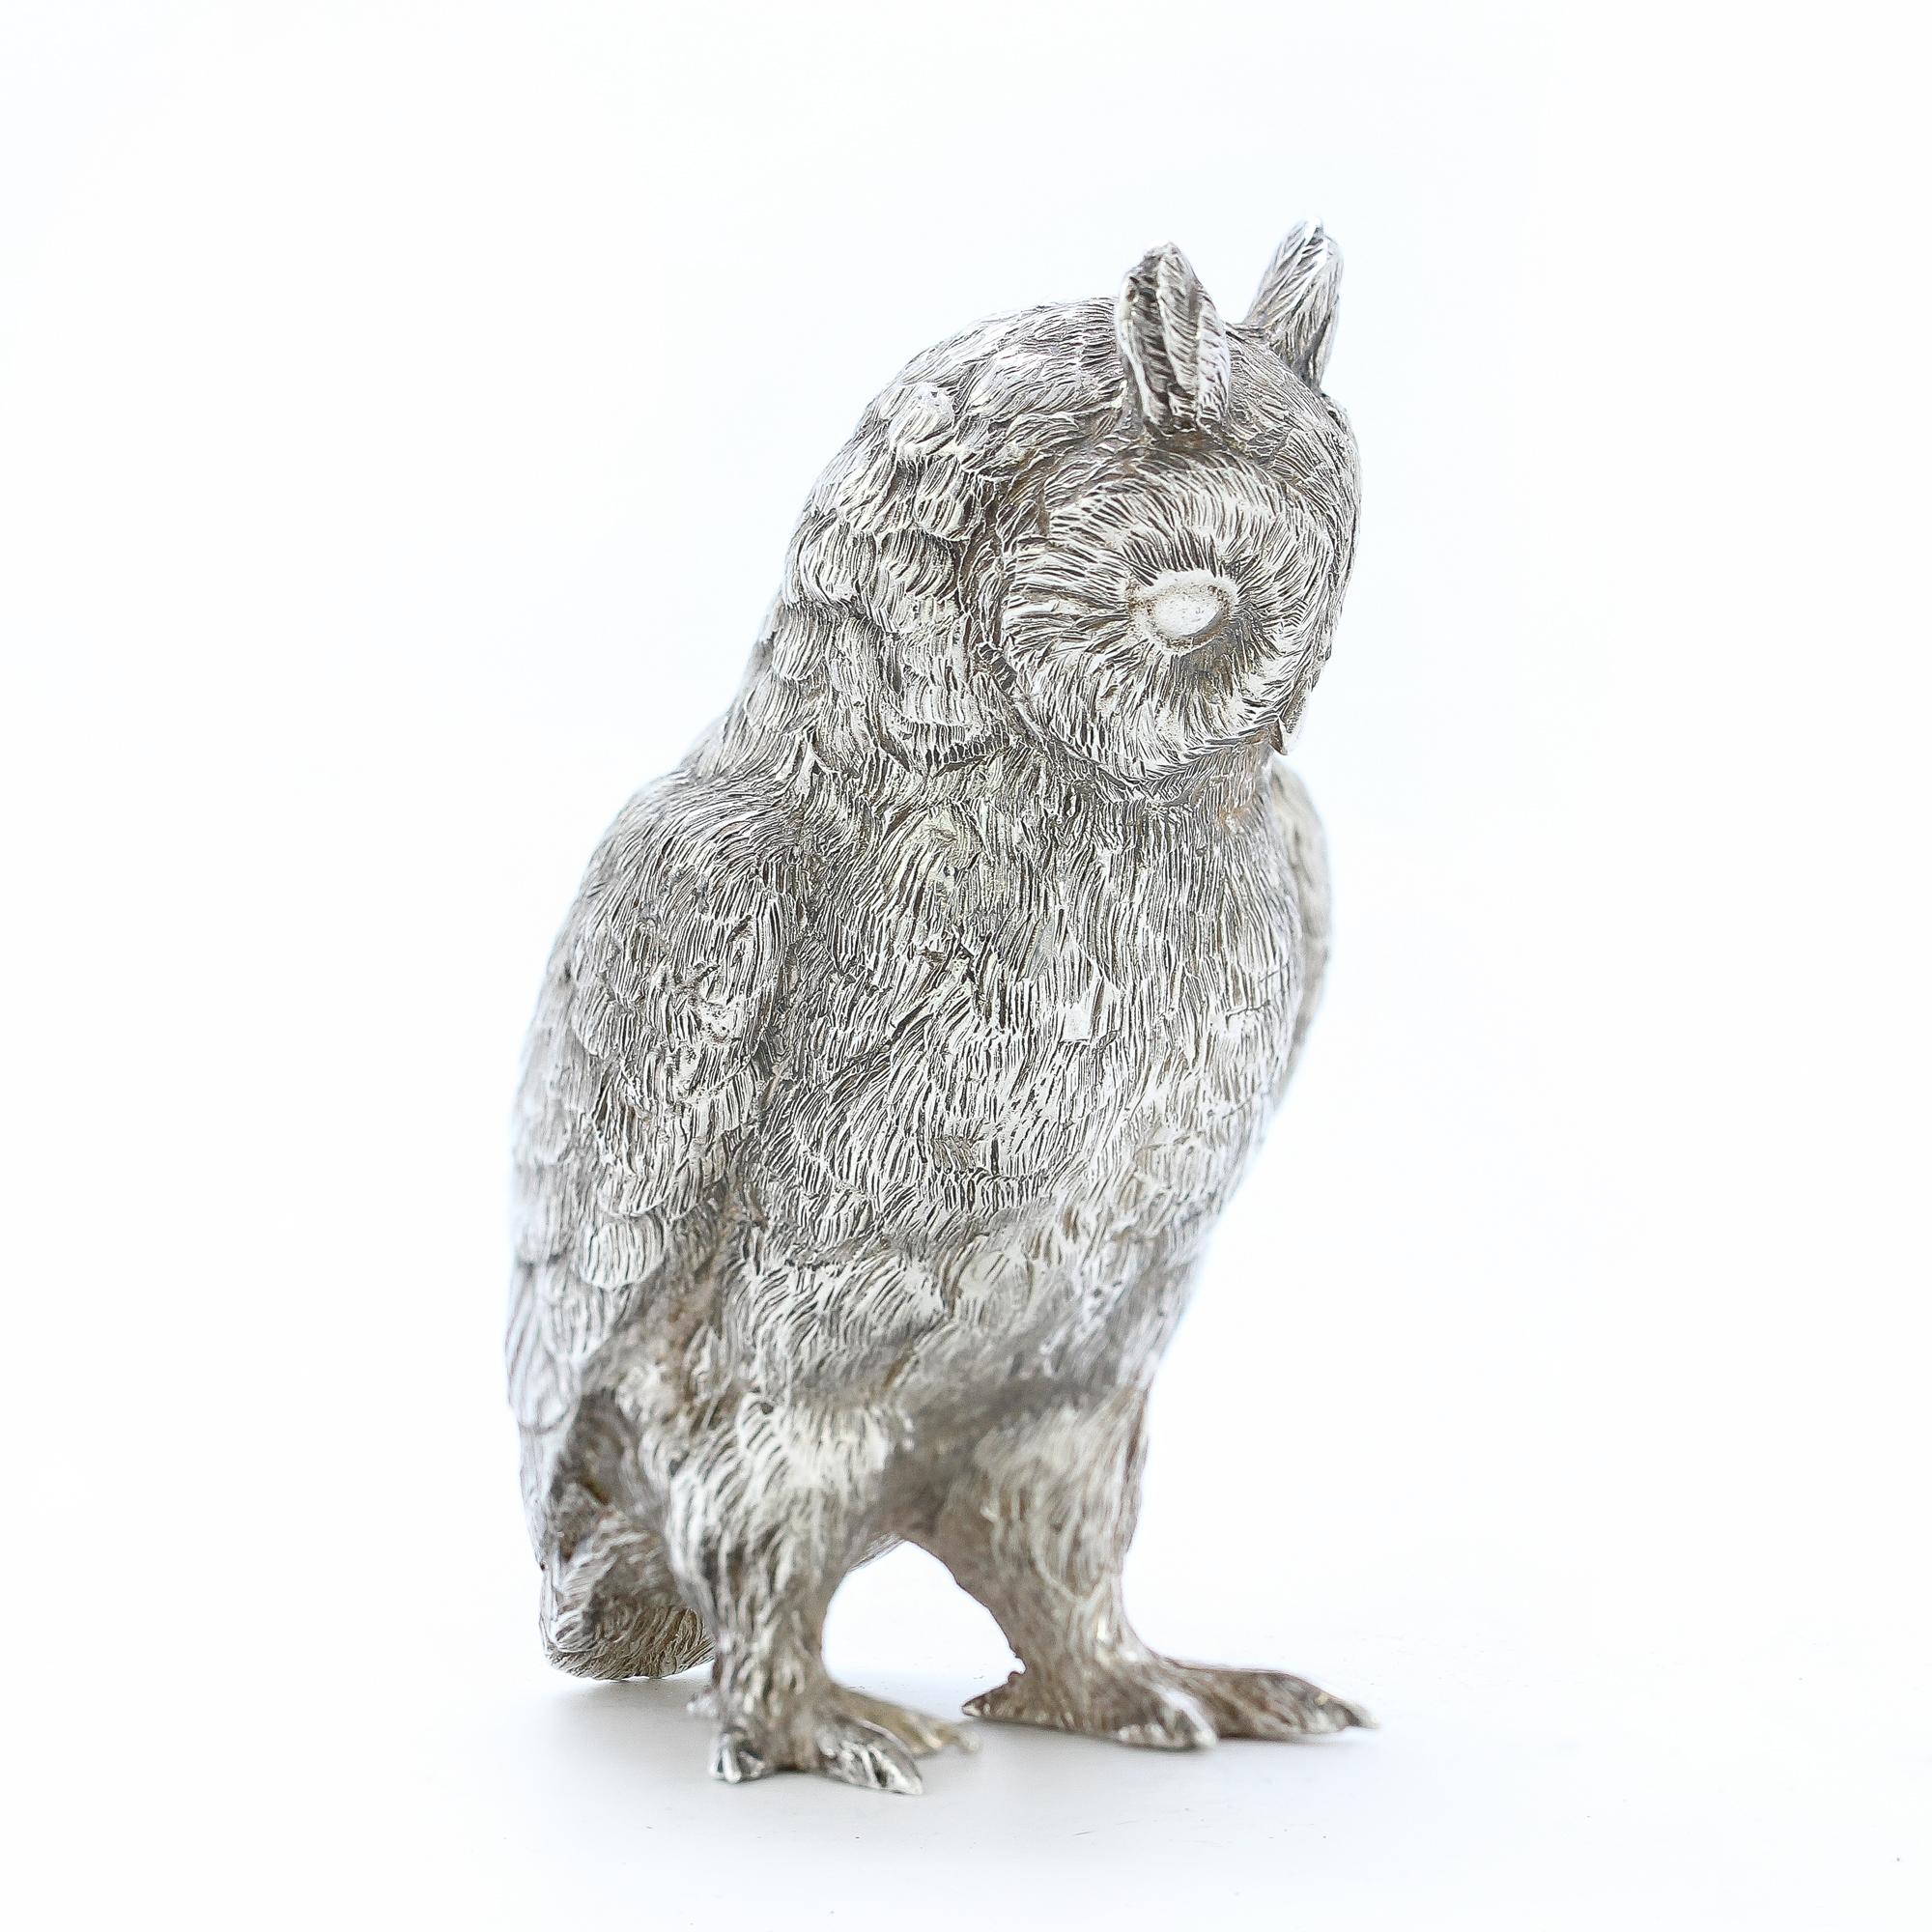 It is a perfect time to visit the forest with this silver owl. For centuries, owls have been immortalized in folklore and literature as wise, good-hearted creatures capable of seeing into both light and darkness with their piercing eyes. The